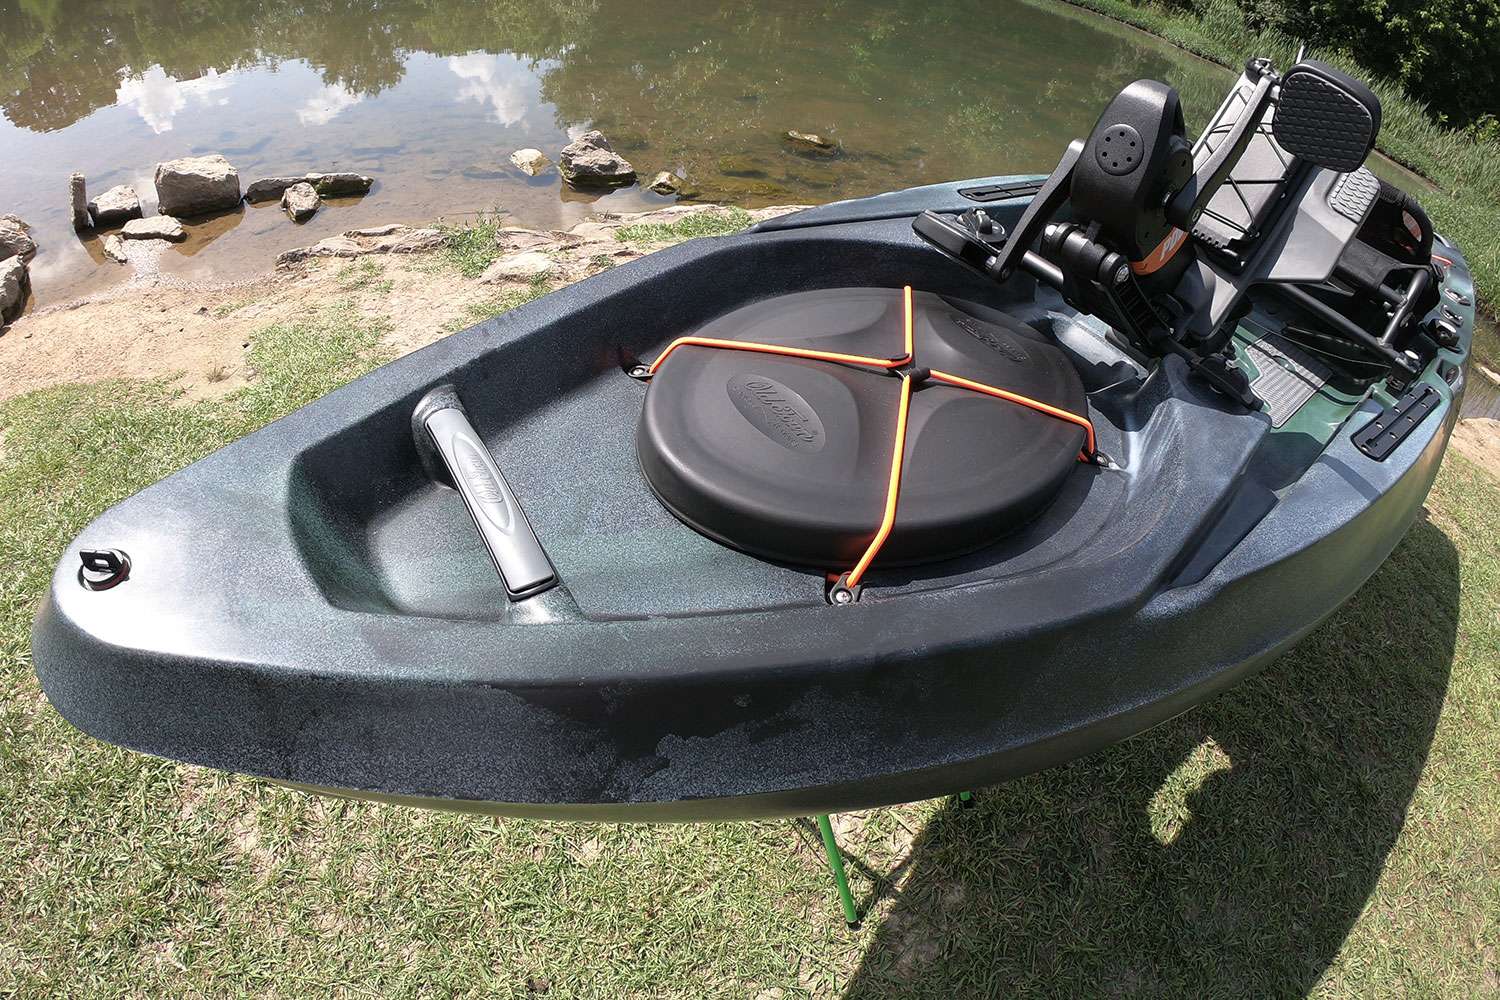 Starting at the front of the kayak, there is a waterproof hatch that allows for ample storage of additional gear.